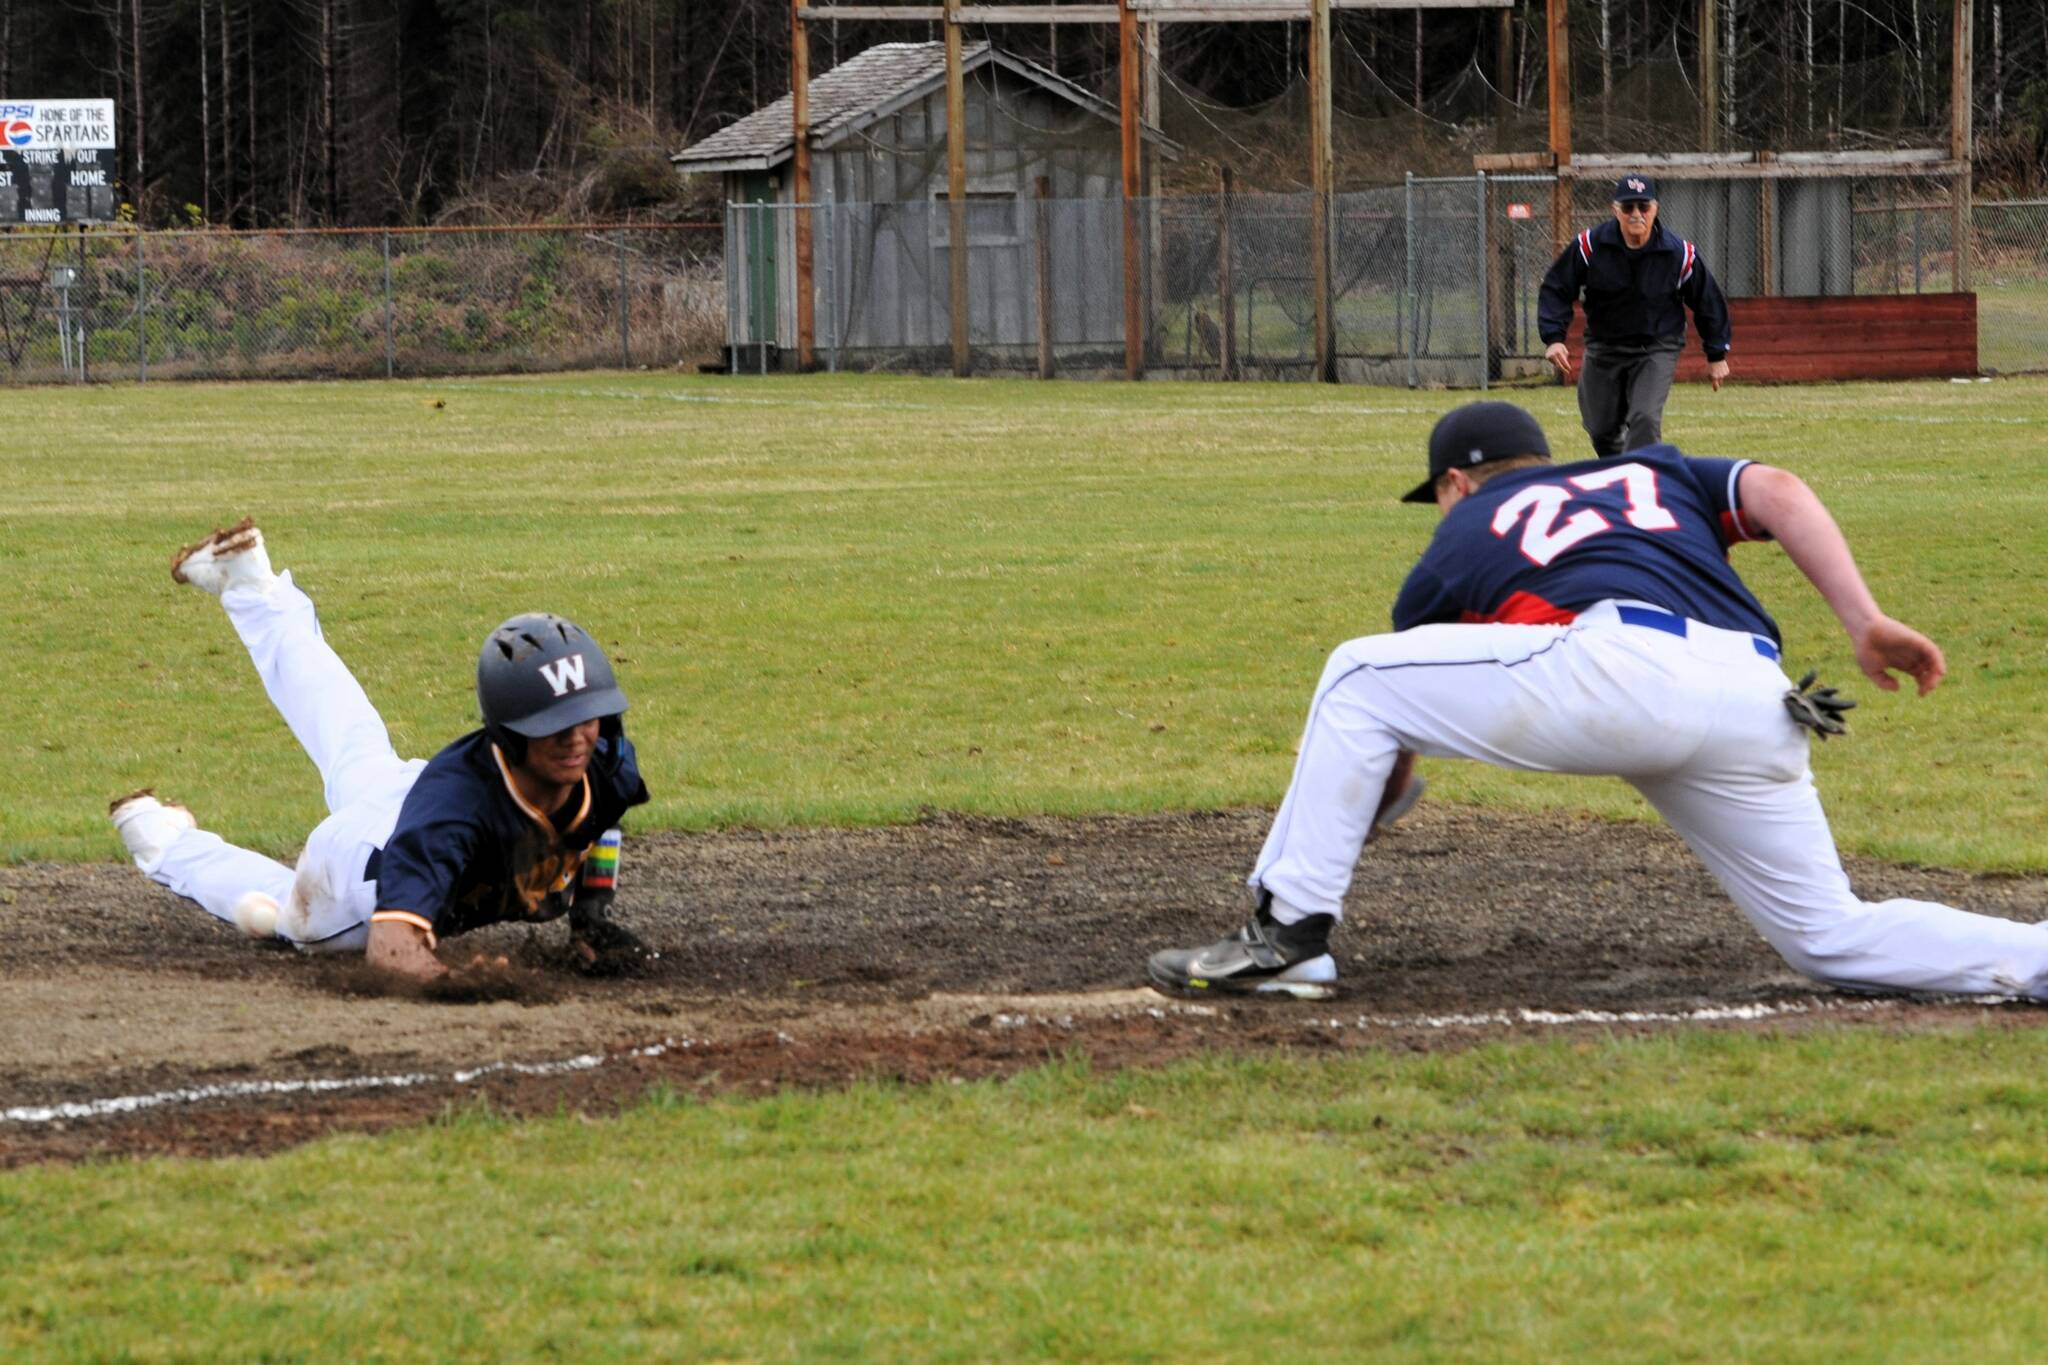 Bubba Hernandez Stansbury steals third base during the first game of the doubleheader. Photo by Lonnie Archibald